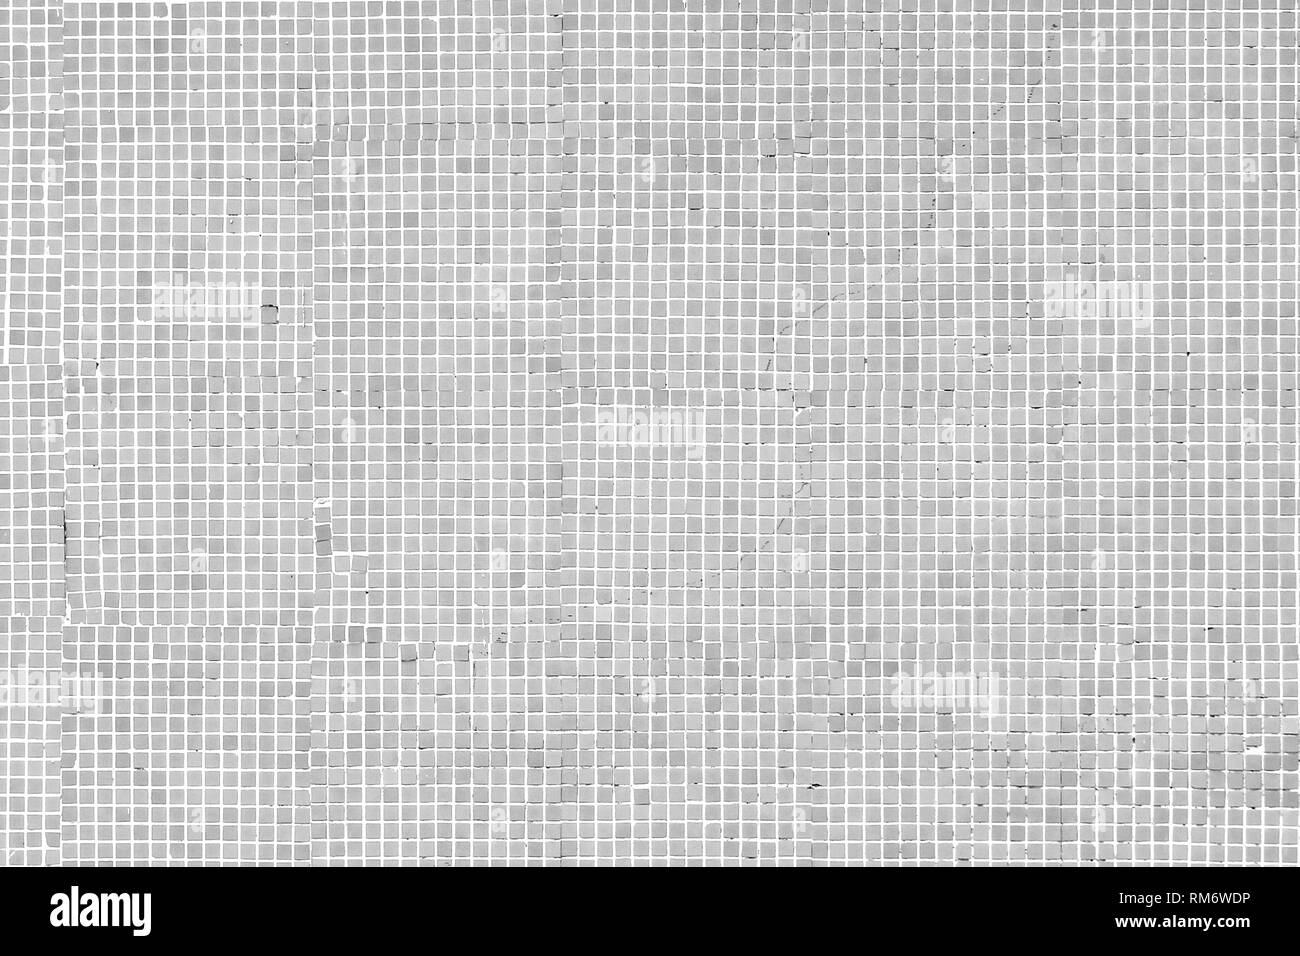 Gray Mosaic Ceramic Tiles Wall Texture Background with White Grout Filling. Abstract Tile Pattern. Stock Photo